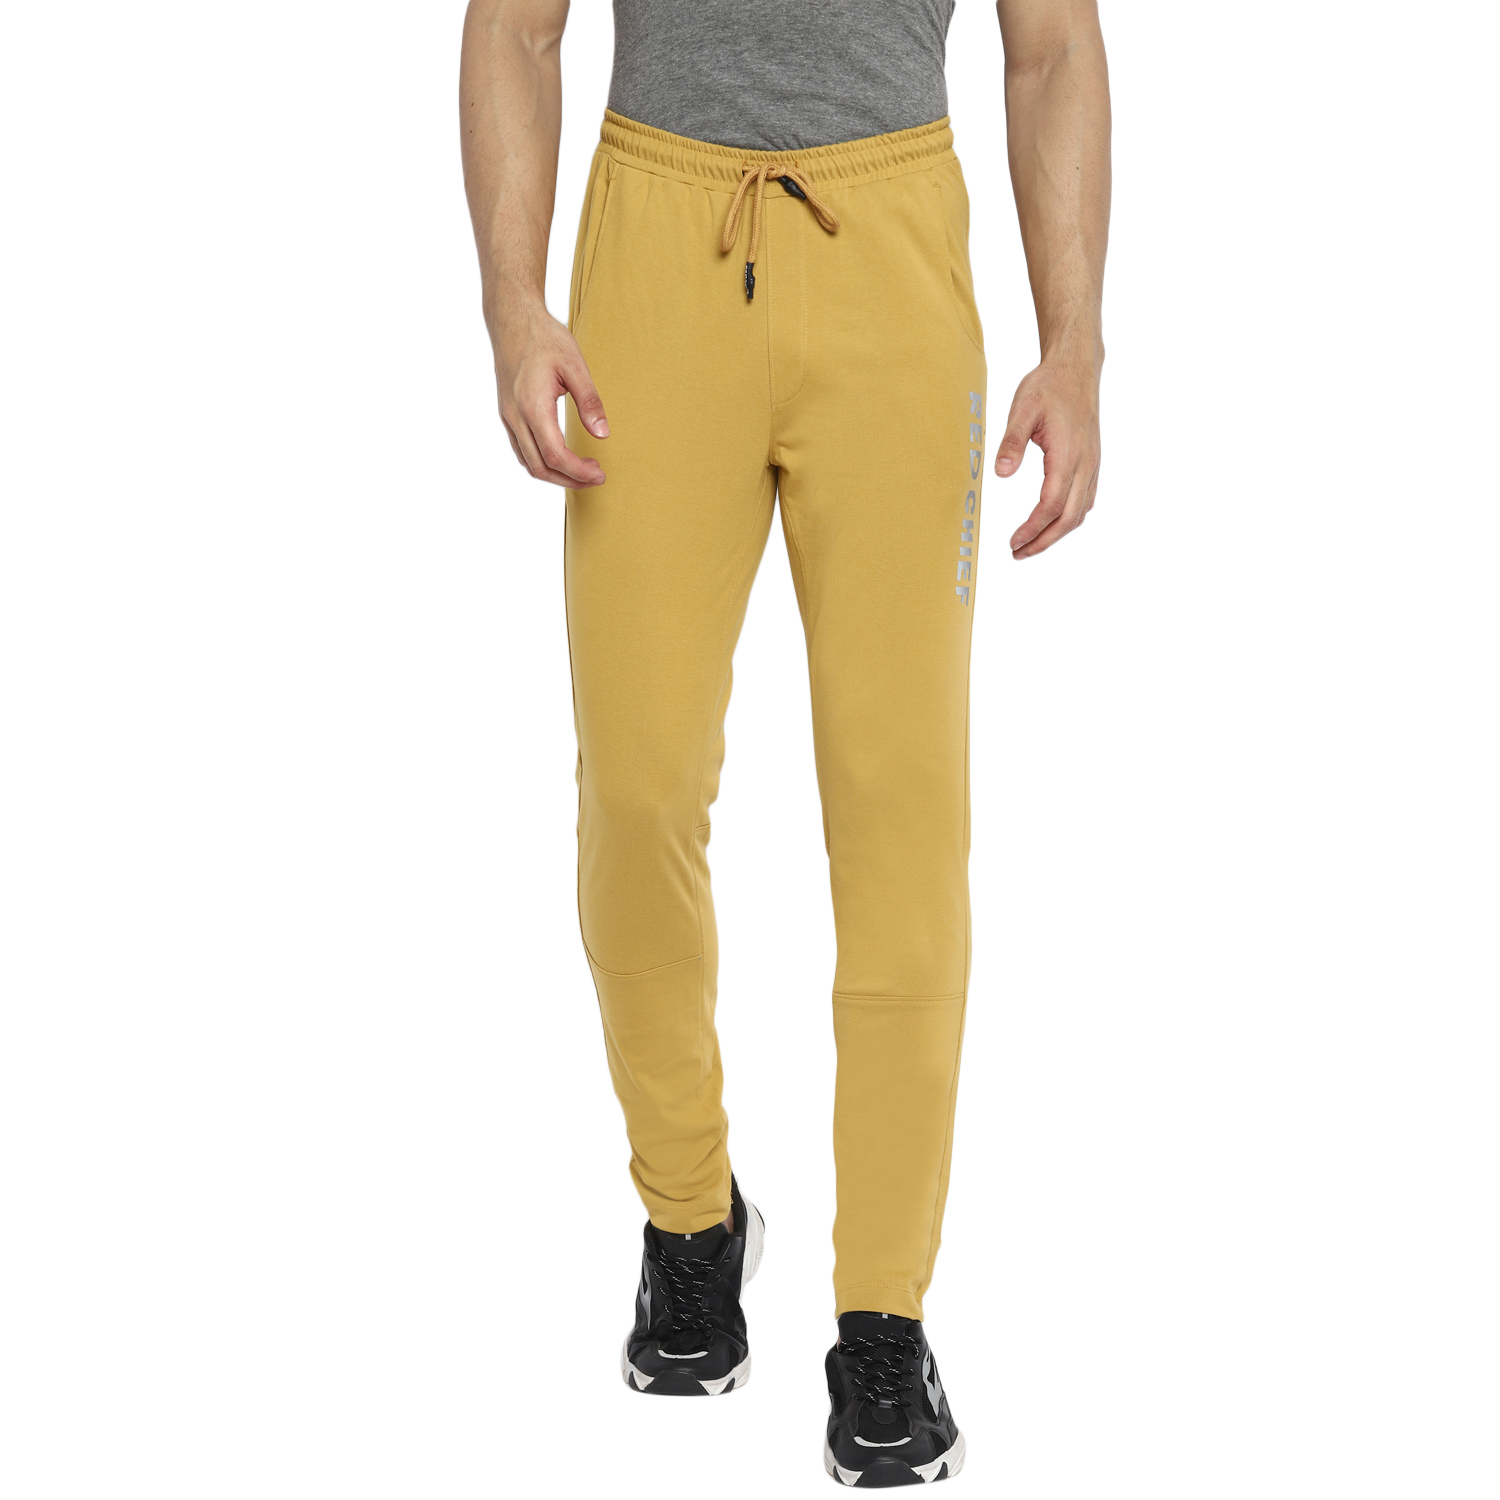 What are the best sweatpants for men? - Quora